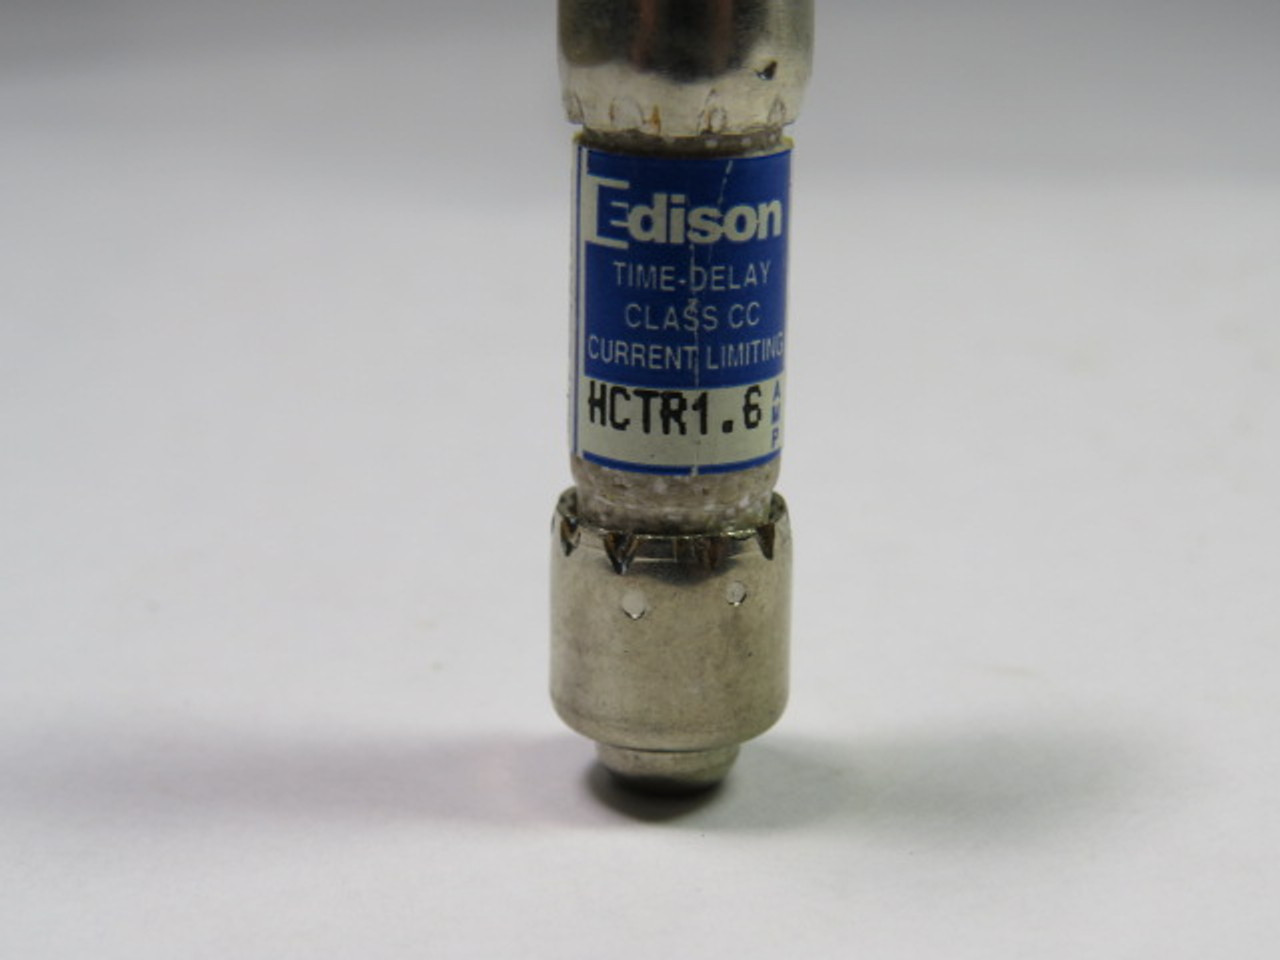 Edison HCTR1.6 Time Delay Fuse 1.6A 600V USED